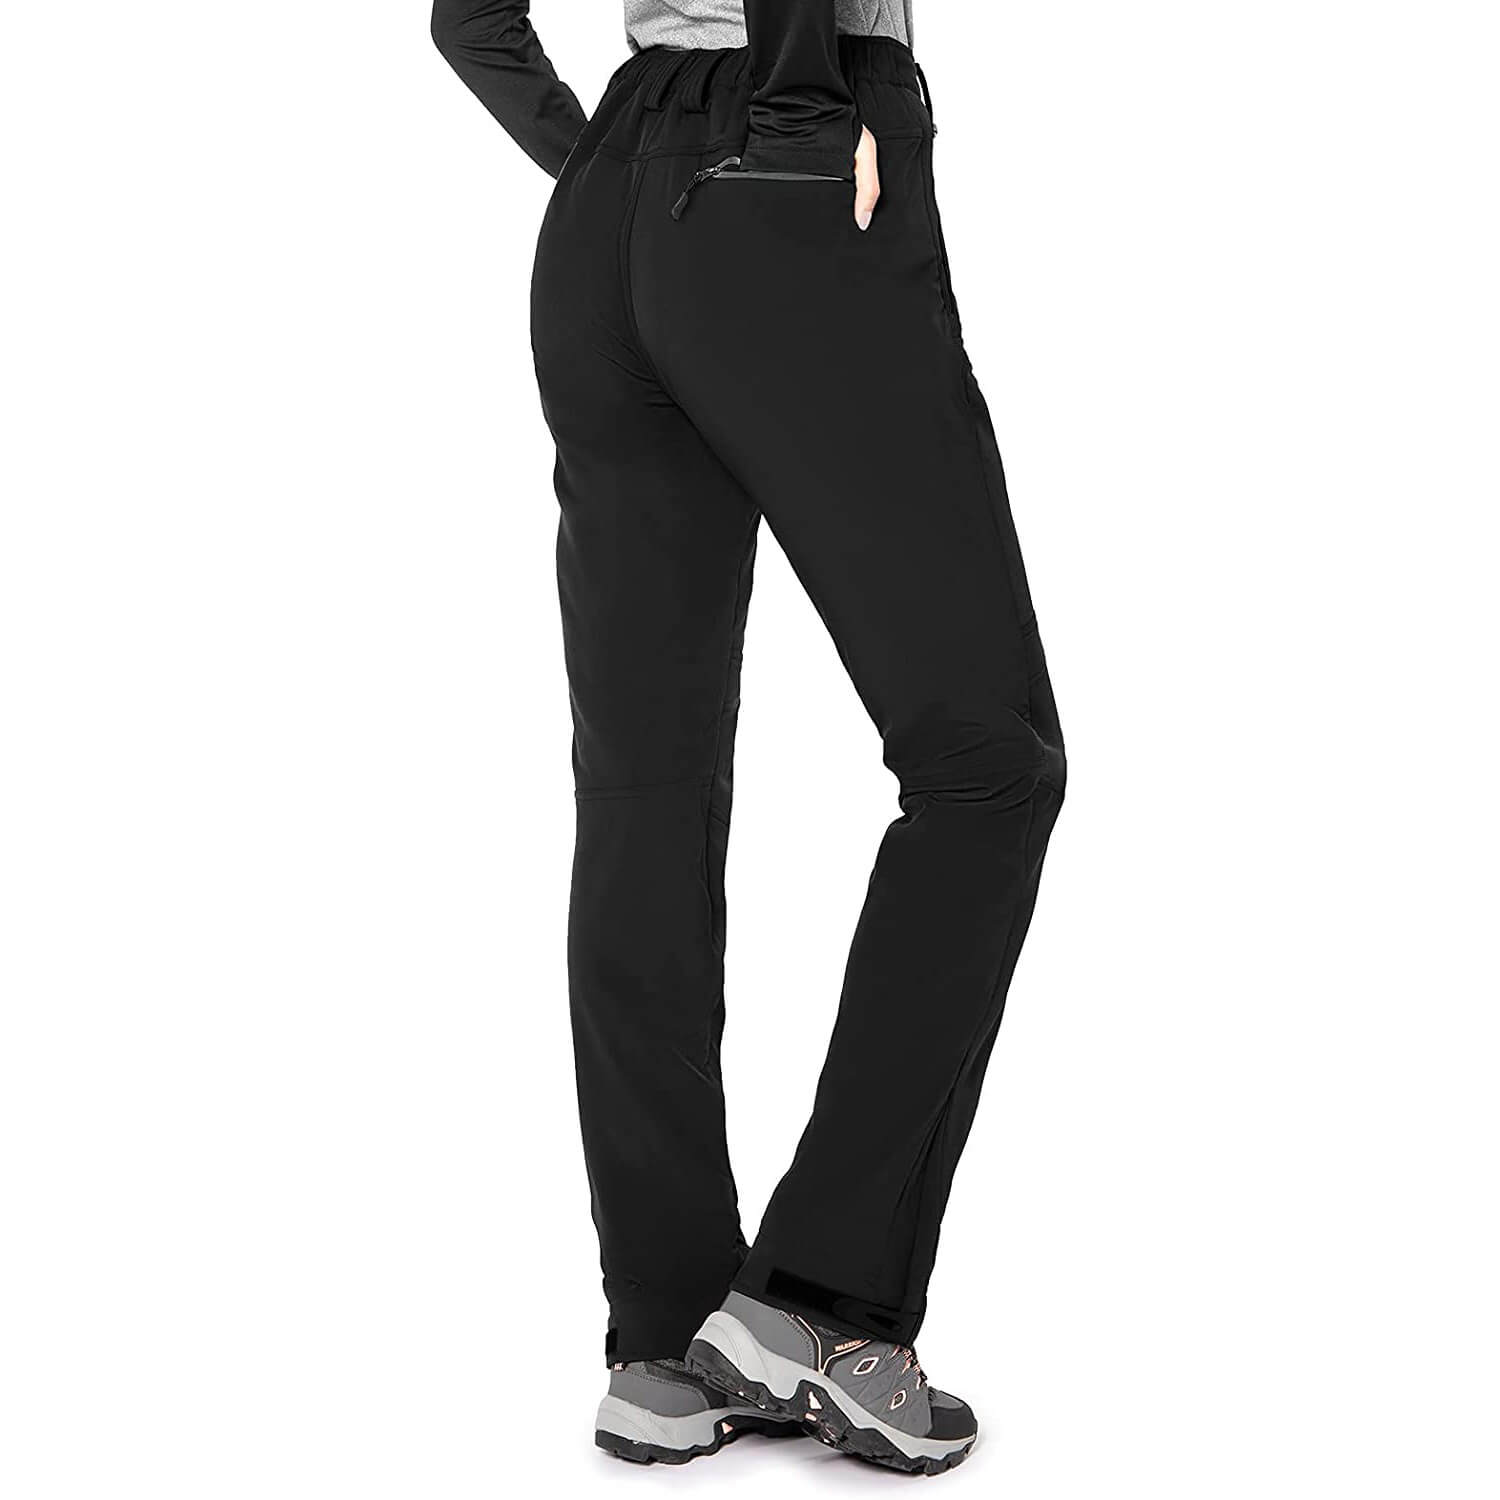 16 Best Hiking Pants for Women That Are Lightweight and Practical | Hiking  pants women, Best hiking pants, Hiking women